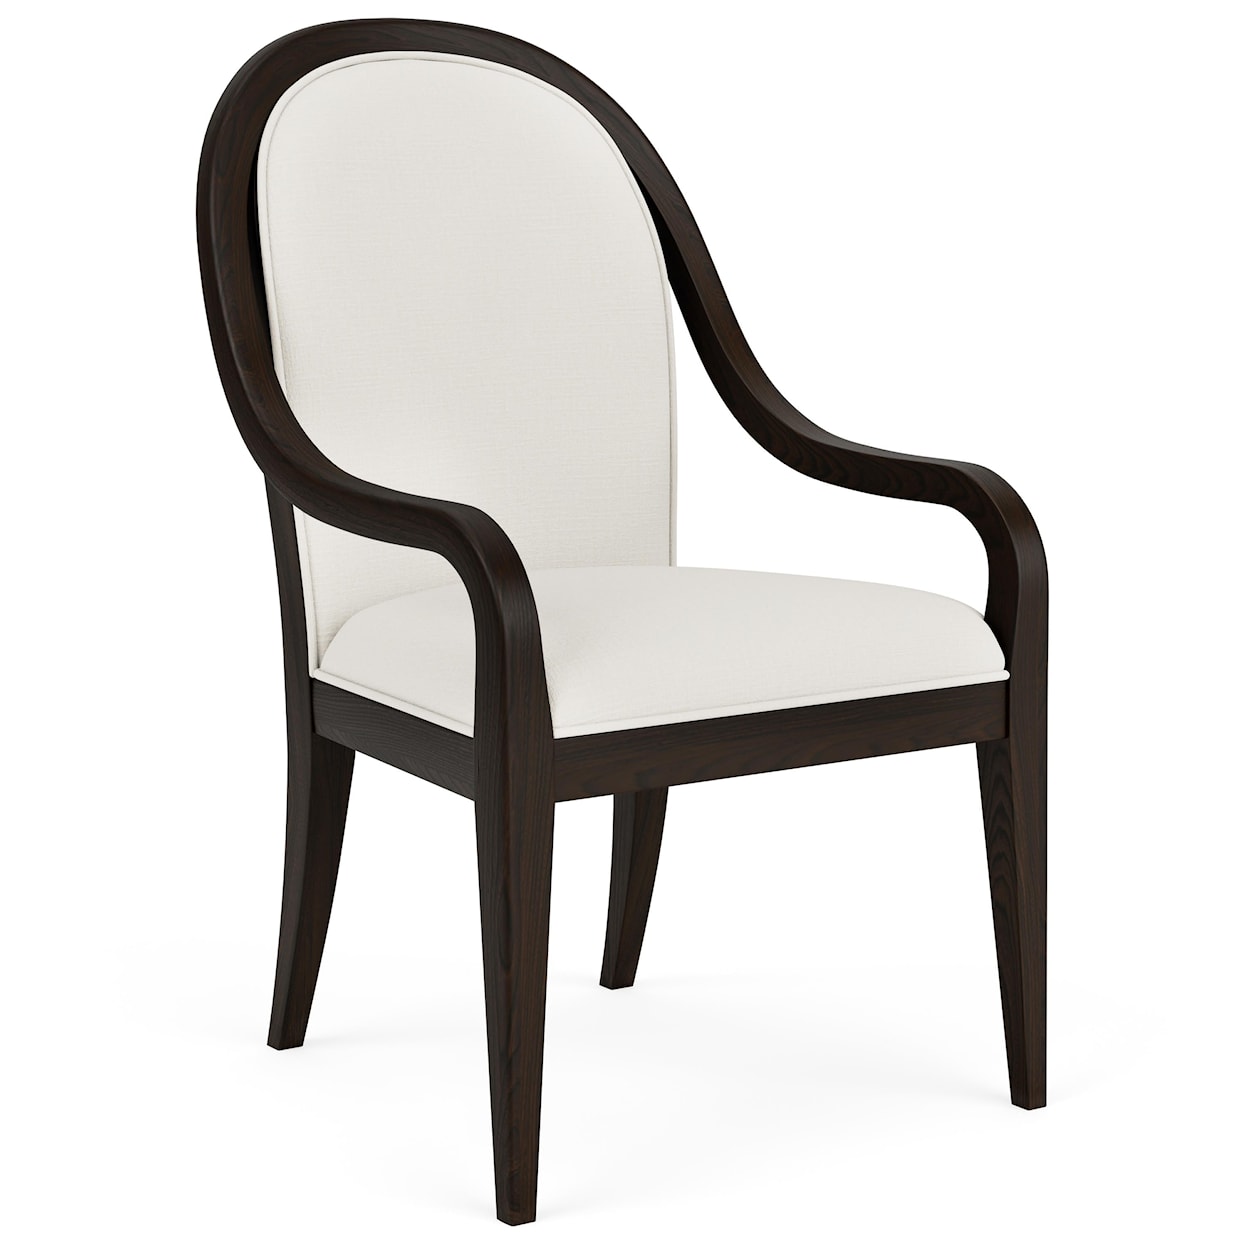 Riverside Furniture Lydia Curved Upholstered Arm Chair